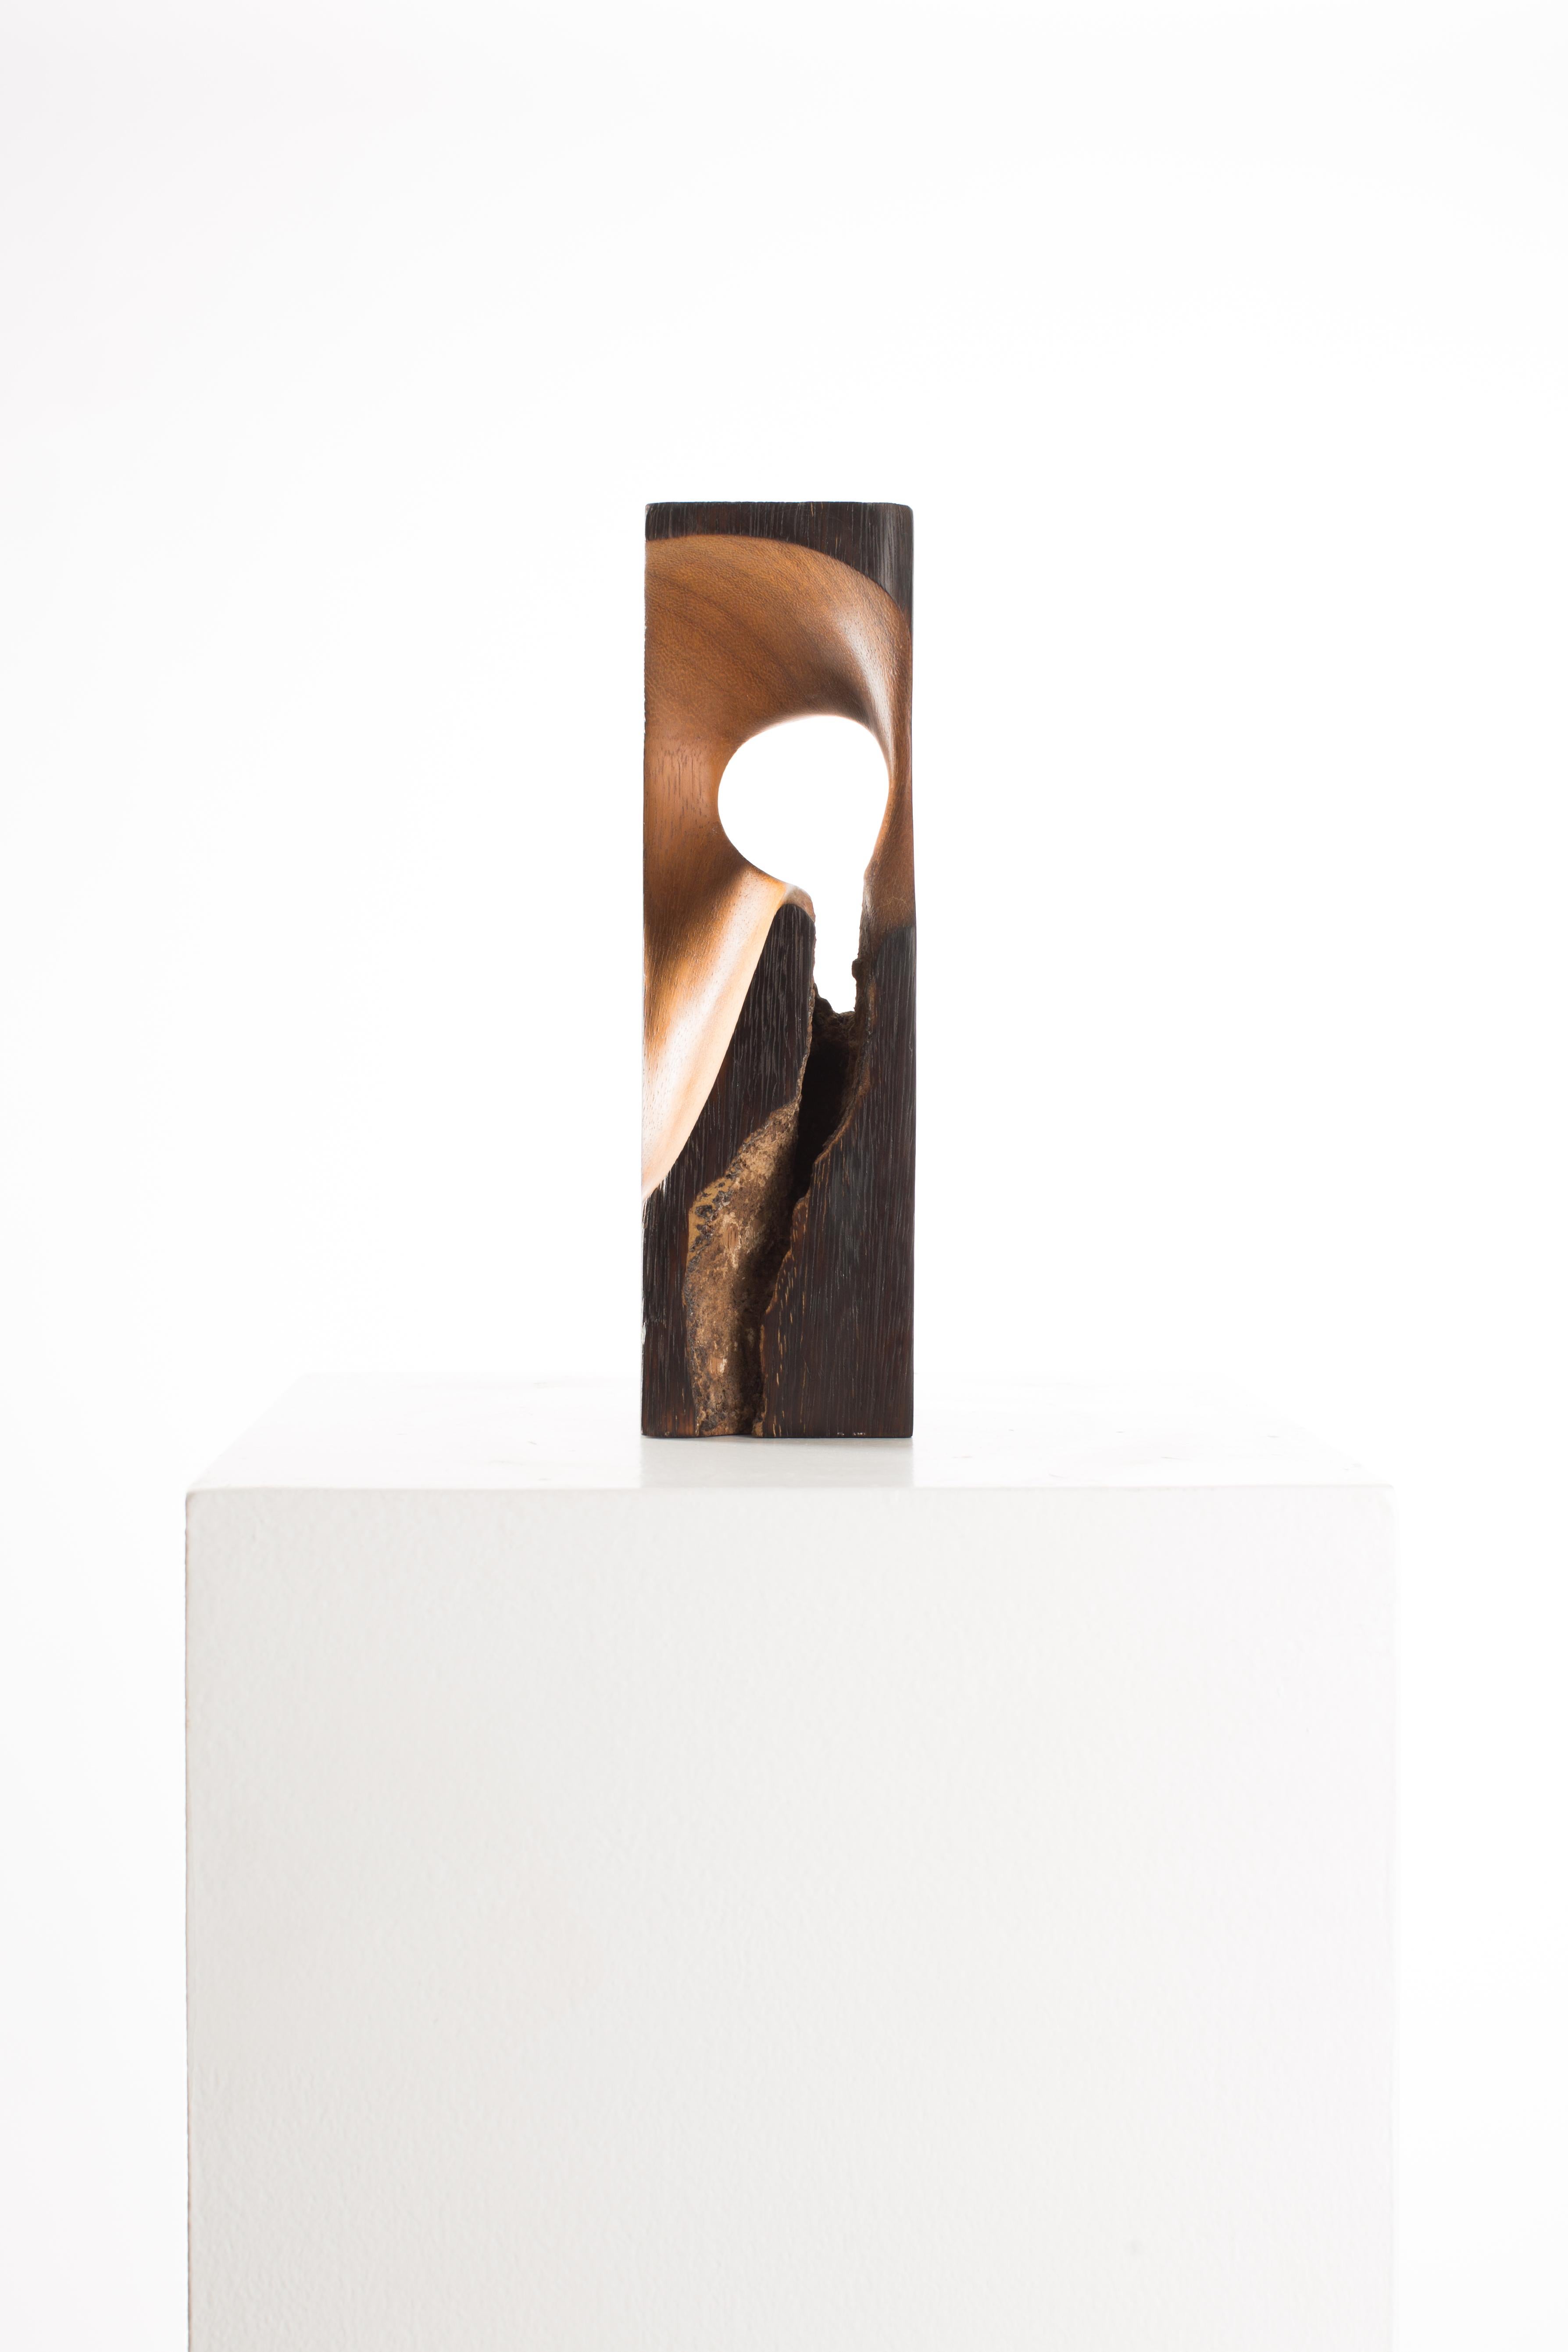 Wooden Cuboid 001 
1/1
Camphor Wood 
24cm x 7cm x 7cm 
0.45Kg
2016

Crystalized Sculptures is an abstracted exploration of marks left on the physical mind by experiences of emotion and feelings. In Driaan Claassens' work, where whisps portray the